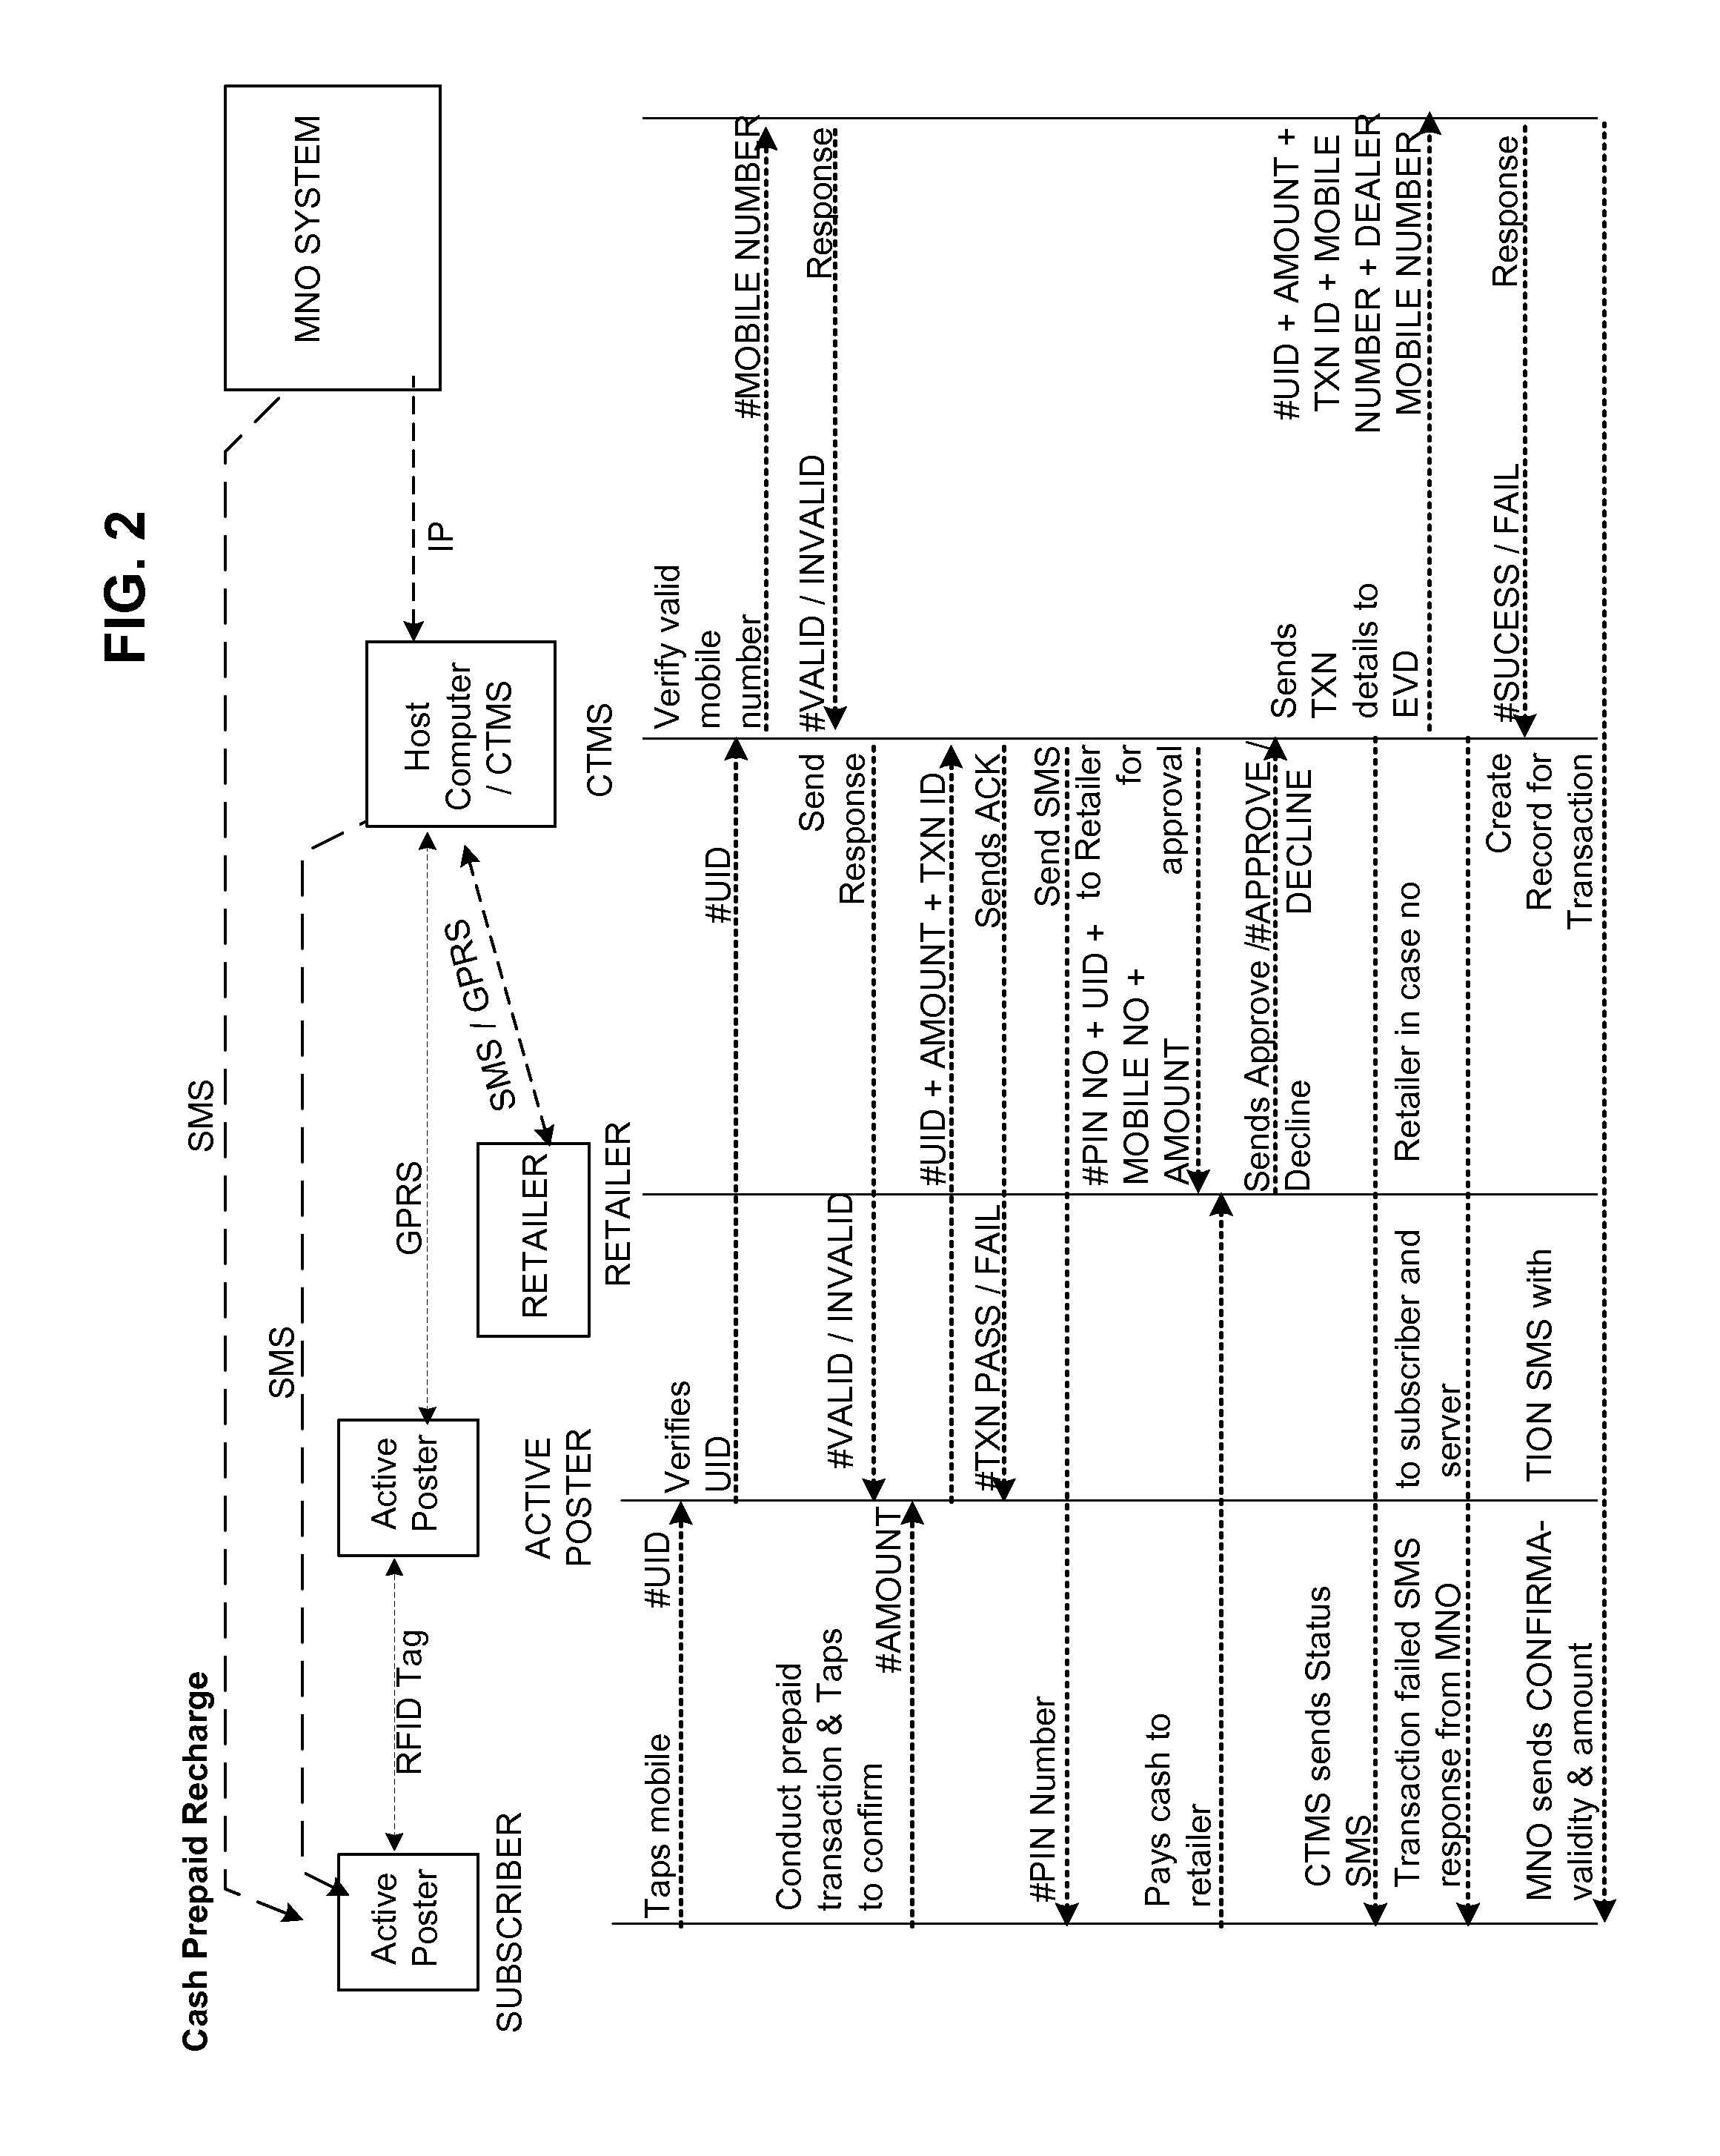 Integrated system and method for enabling mobile commerce transactions using active posters and contactless identity modules